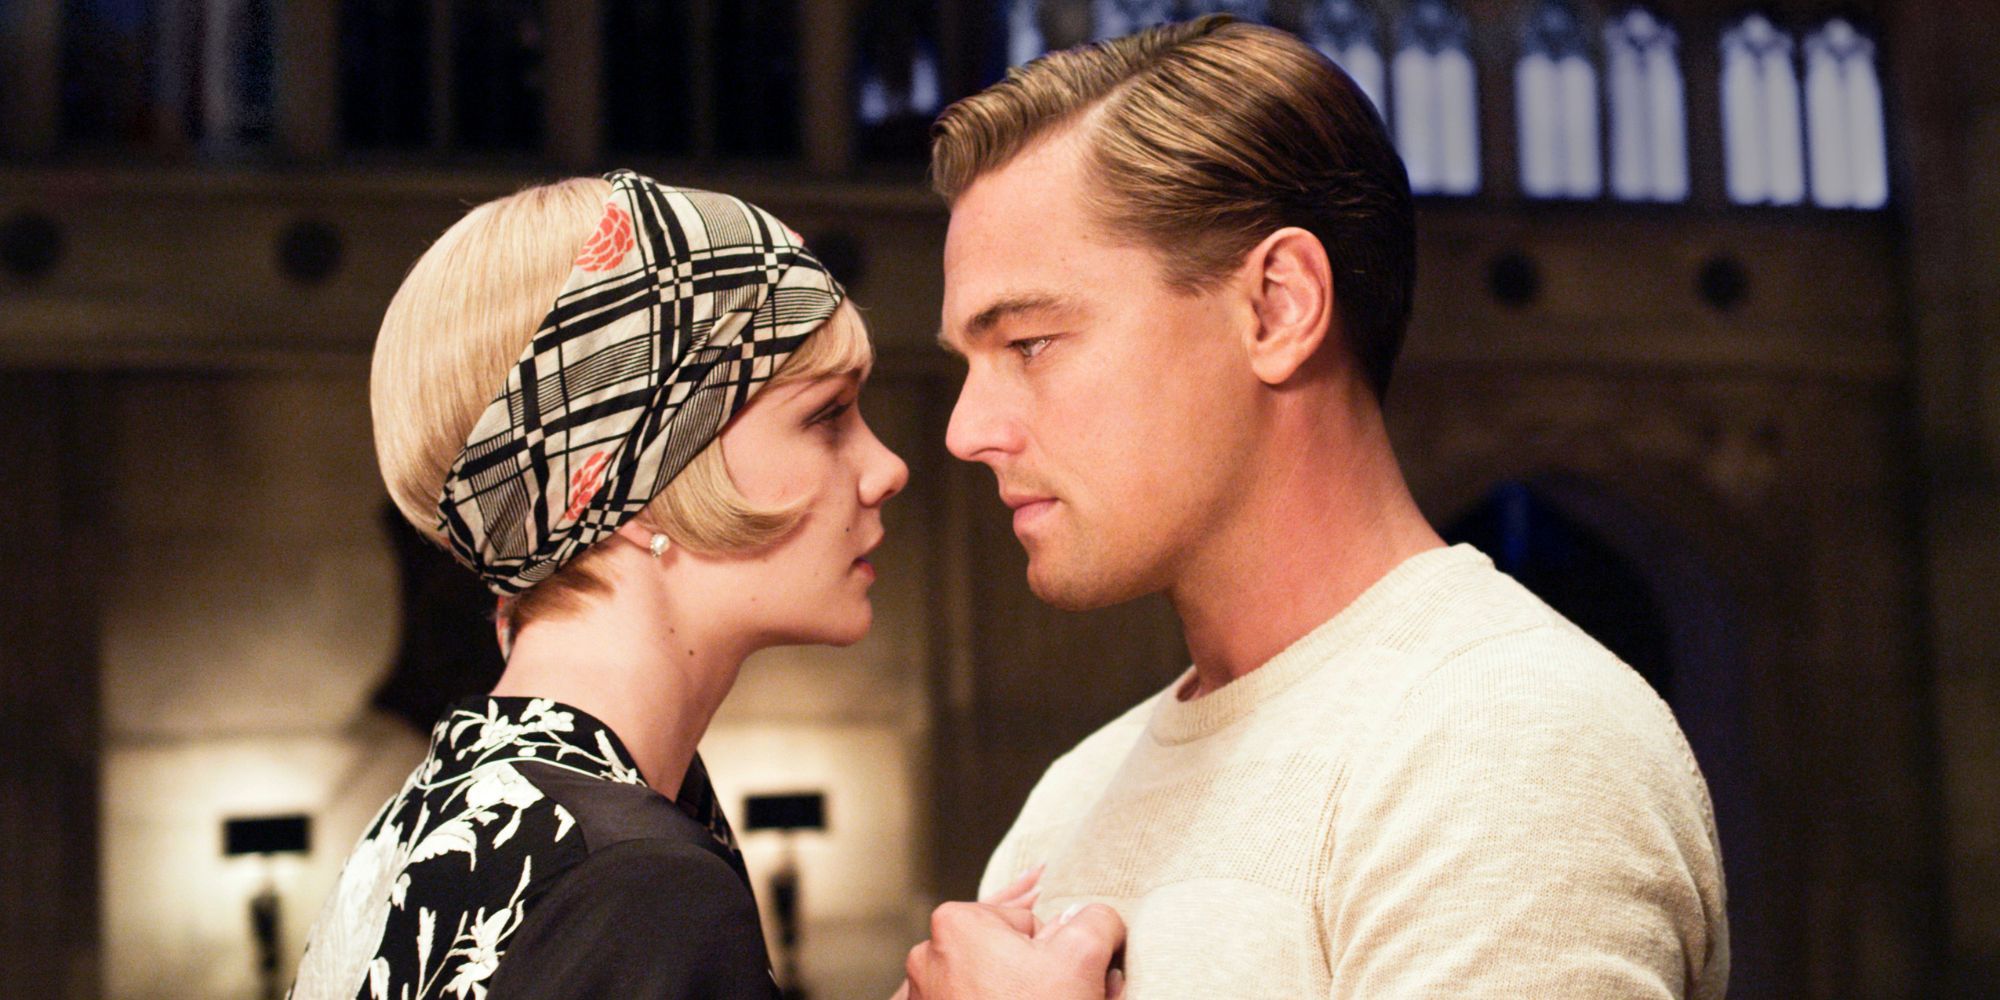 Daisy and Jay from The Great Gatsby standing together